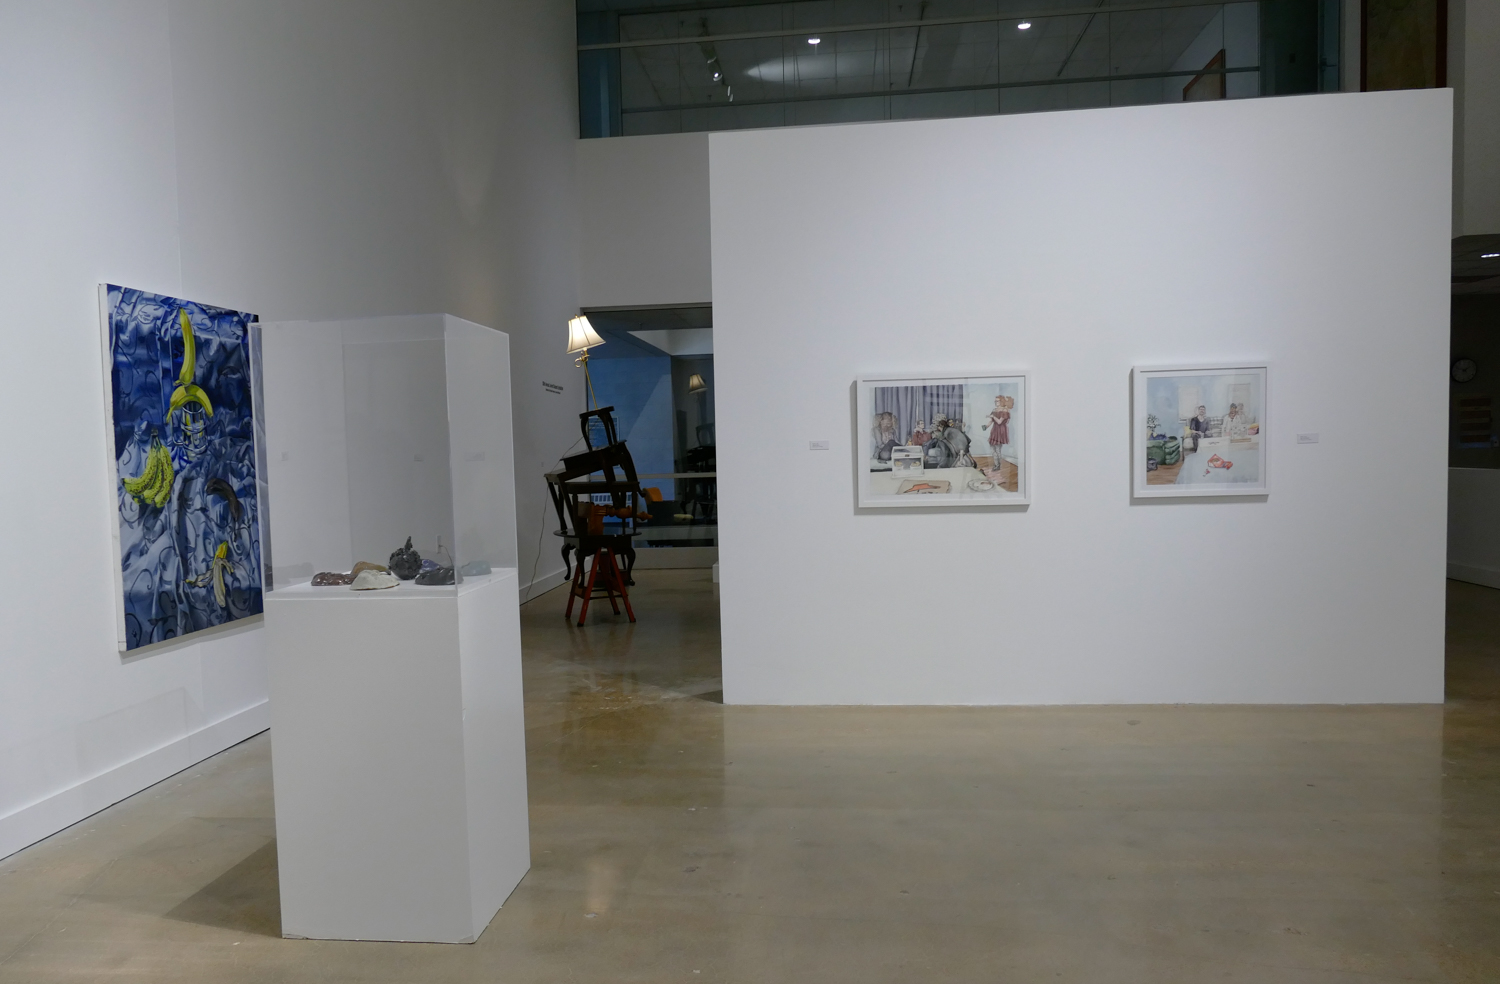 35th Annual Juried Student Exhibition - Installation Views